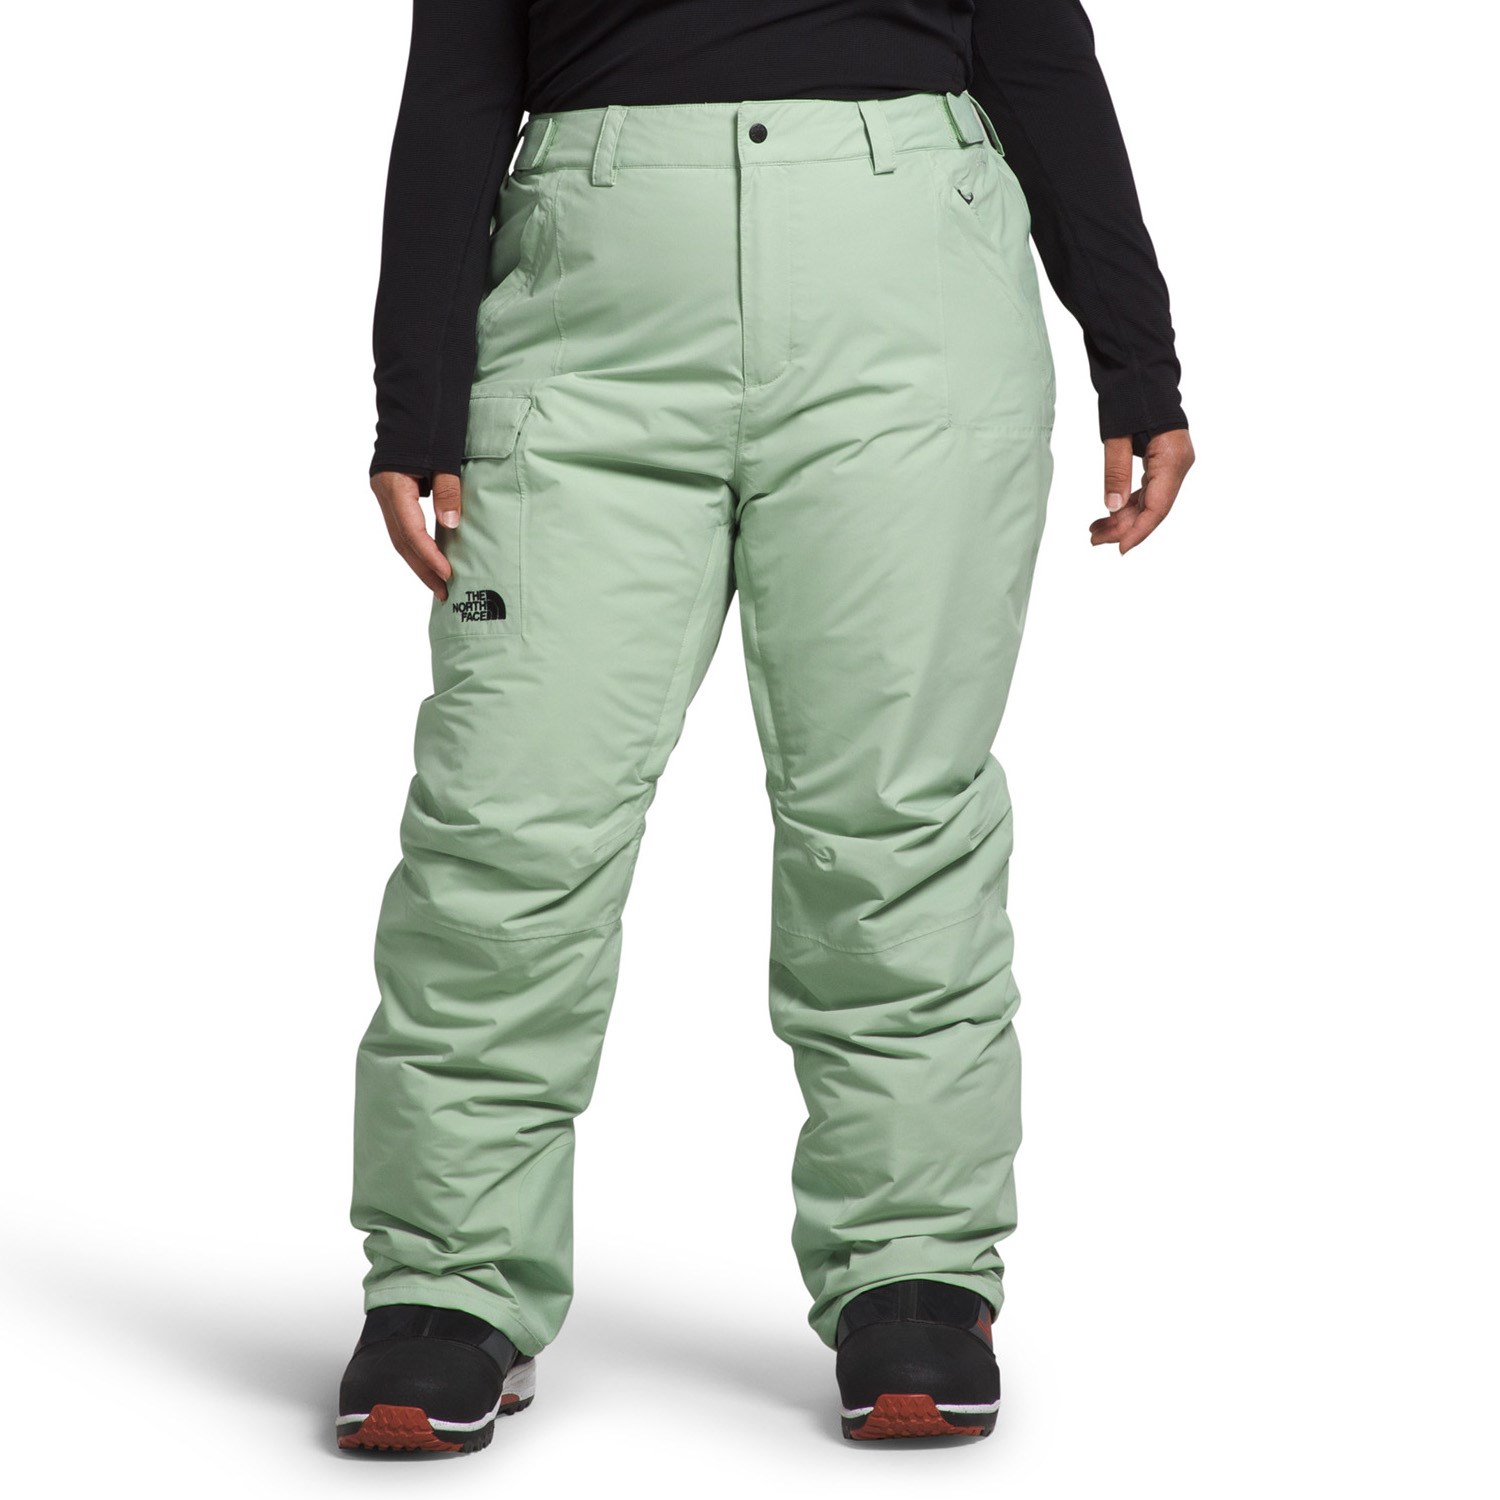 Брюки The North Face Freedom Insulated Plus, цвет Misty Sage брюки the north face freedom insulated plus цвет gardenia white